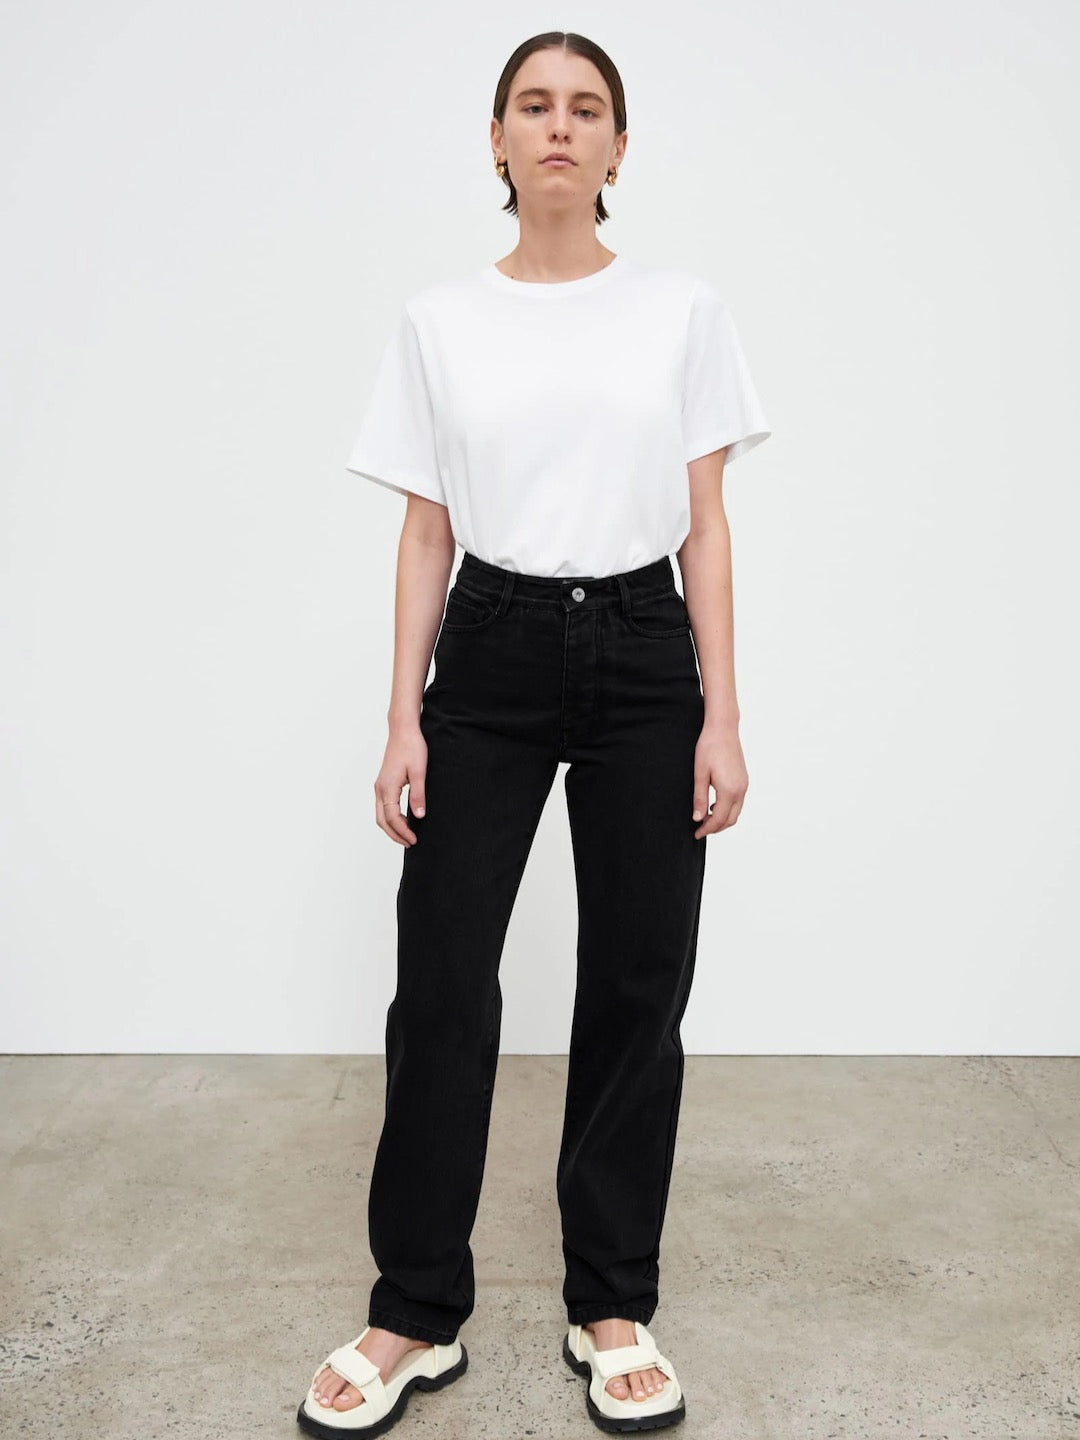 A woman wearing Classic Jeans – Black Denim by Kowtow and a white t-shirt.